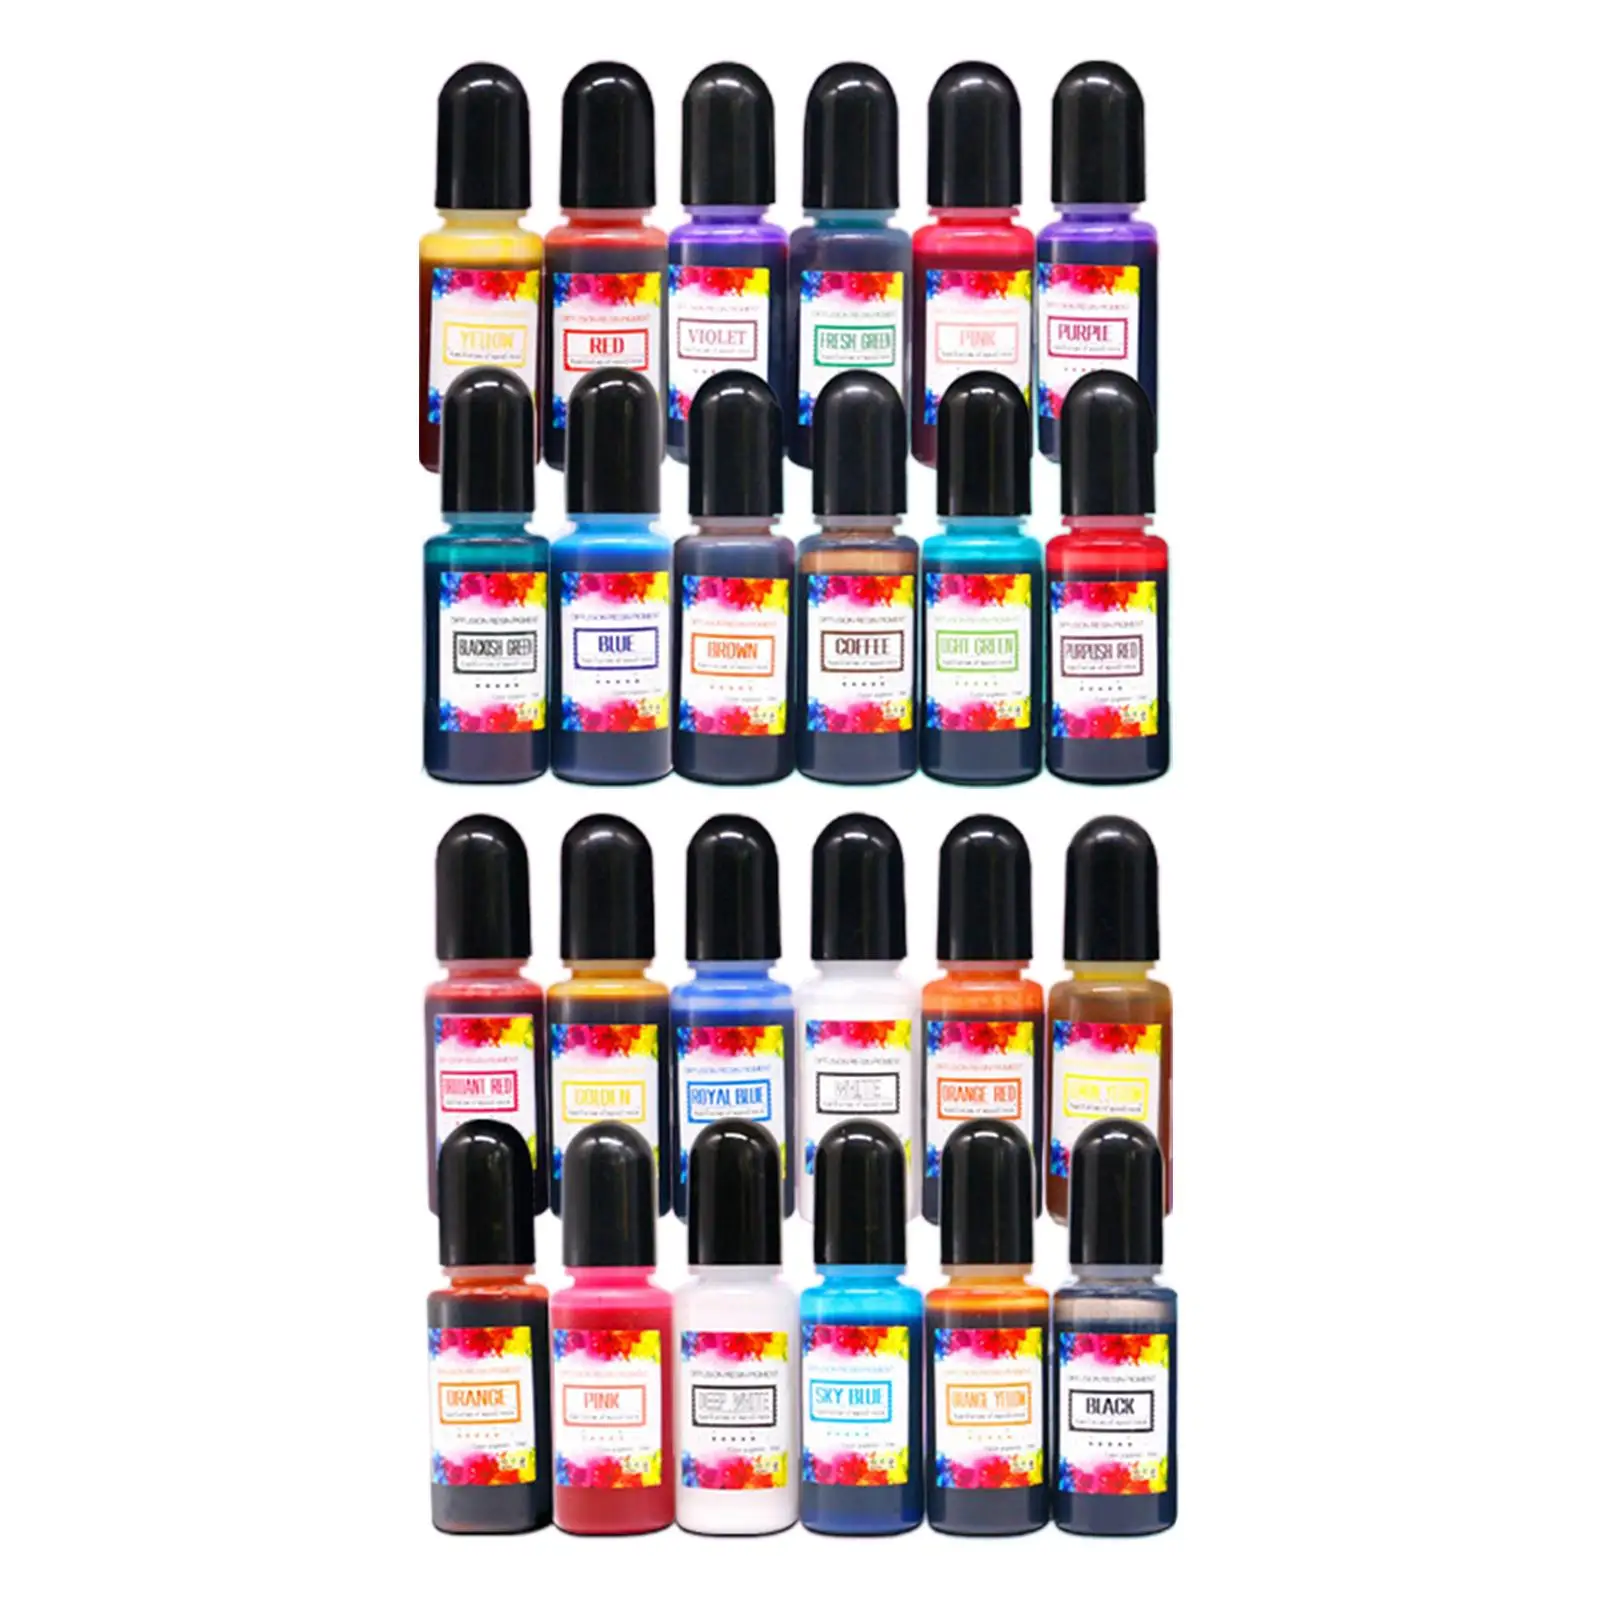 24x Vibrant Inks Epoxy Resin Pigment Resin Coloring Liquid Dye Concentrate 10ml for Acrylic Painting Drawing DIY Craft Scrapbook